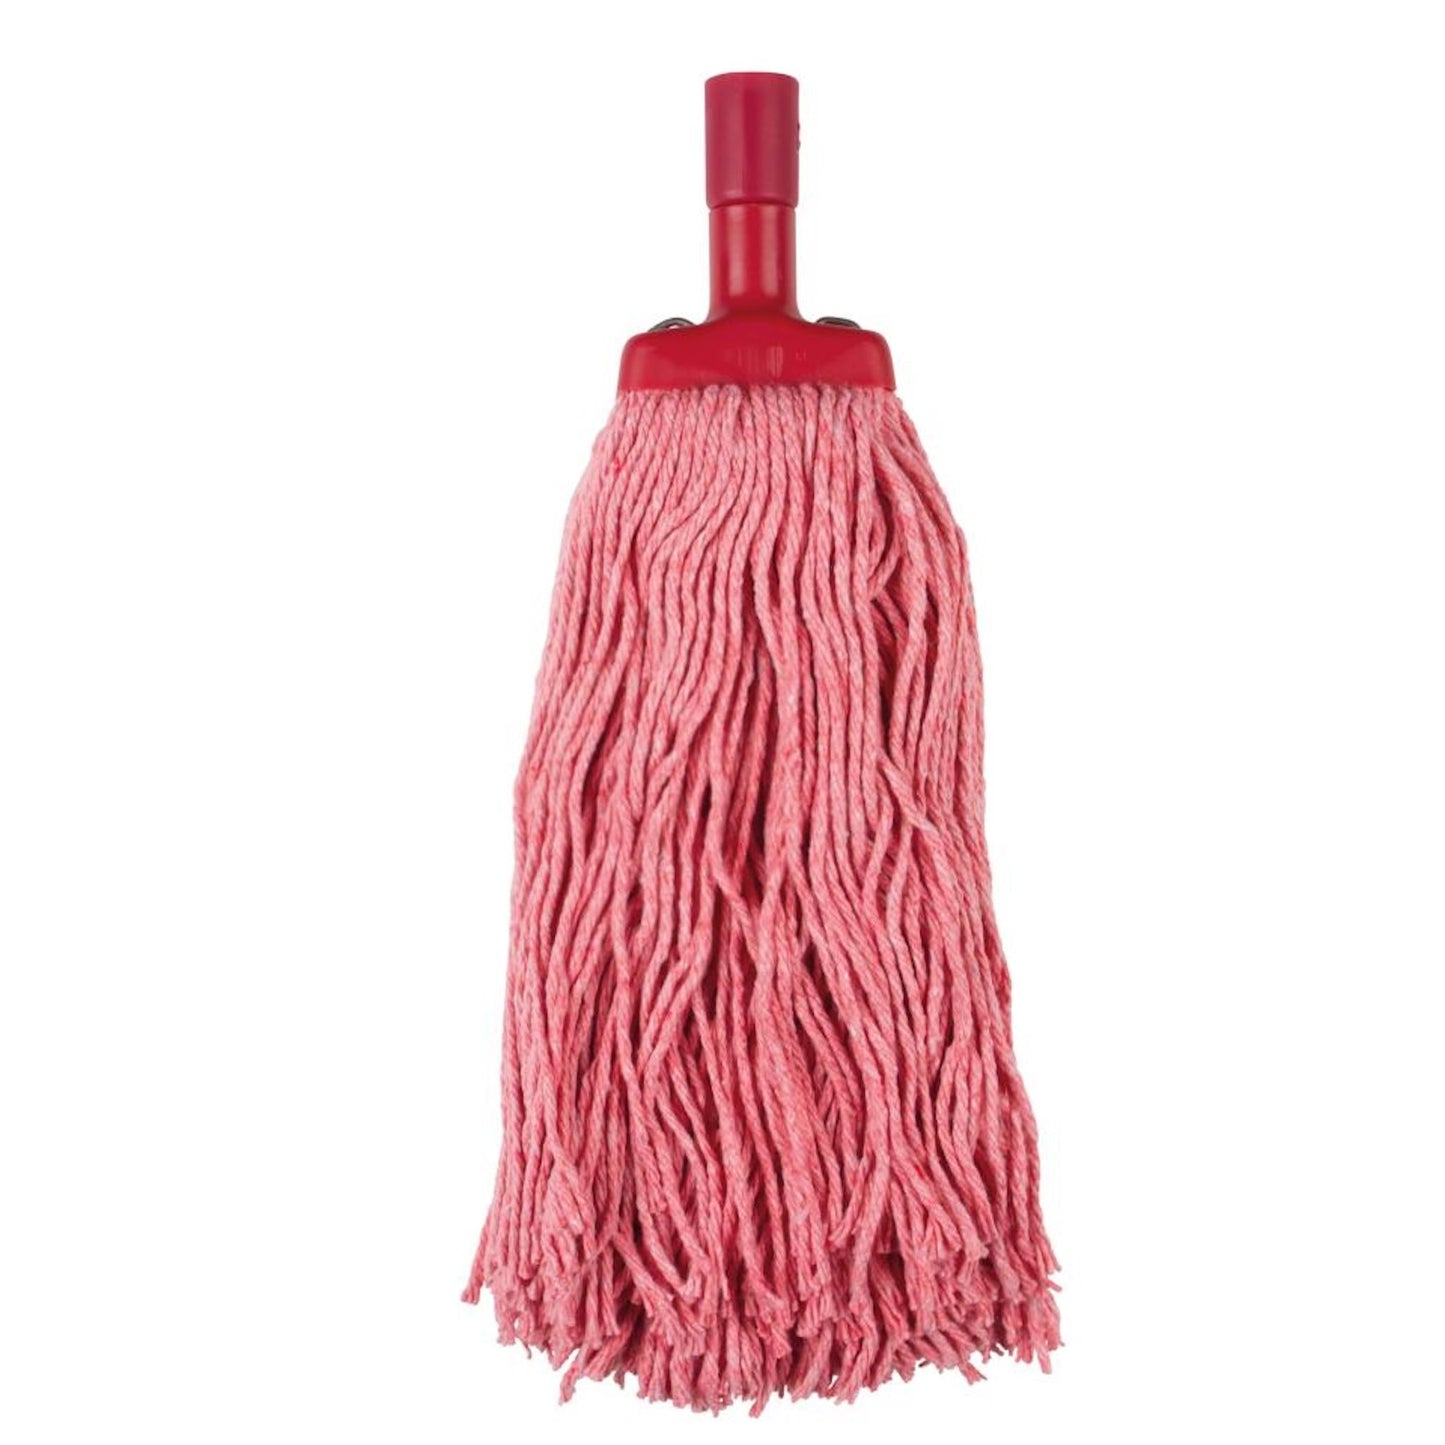 Cleera Mop Head Coloured 400gm Red